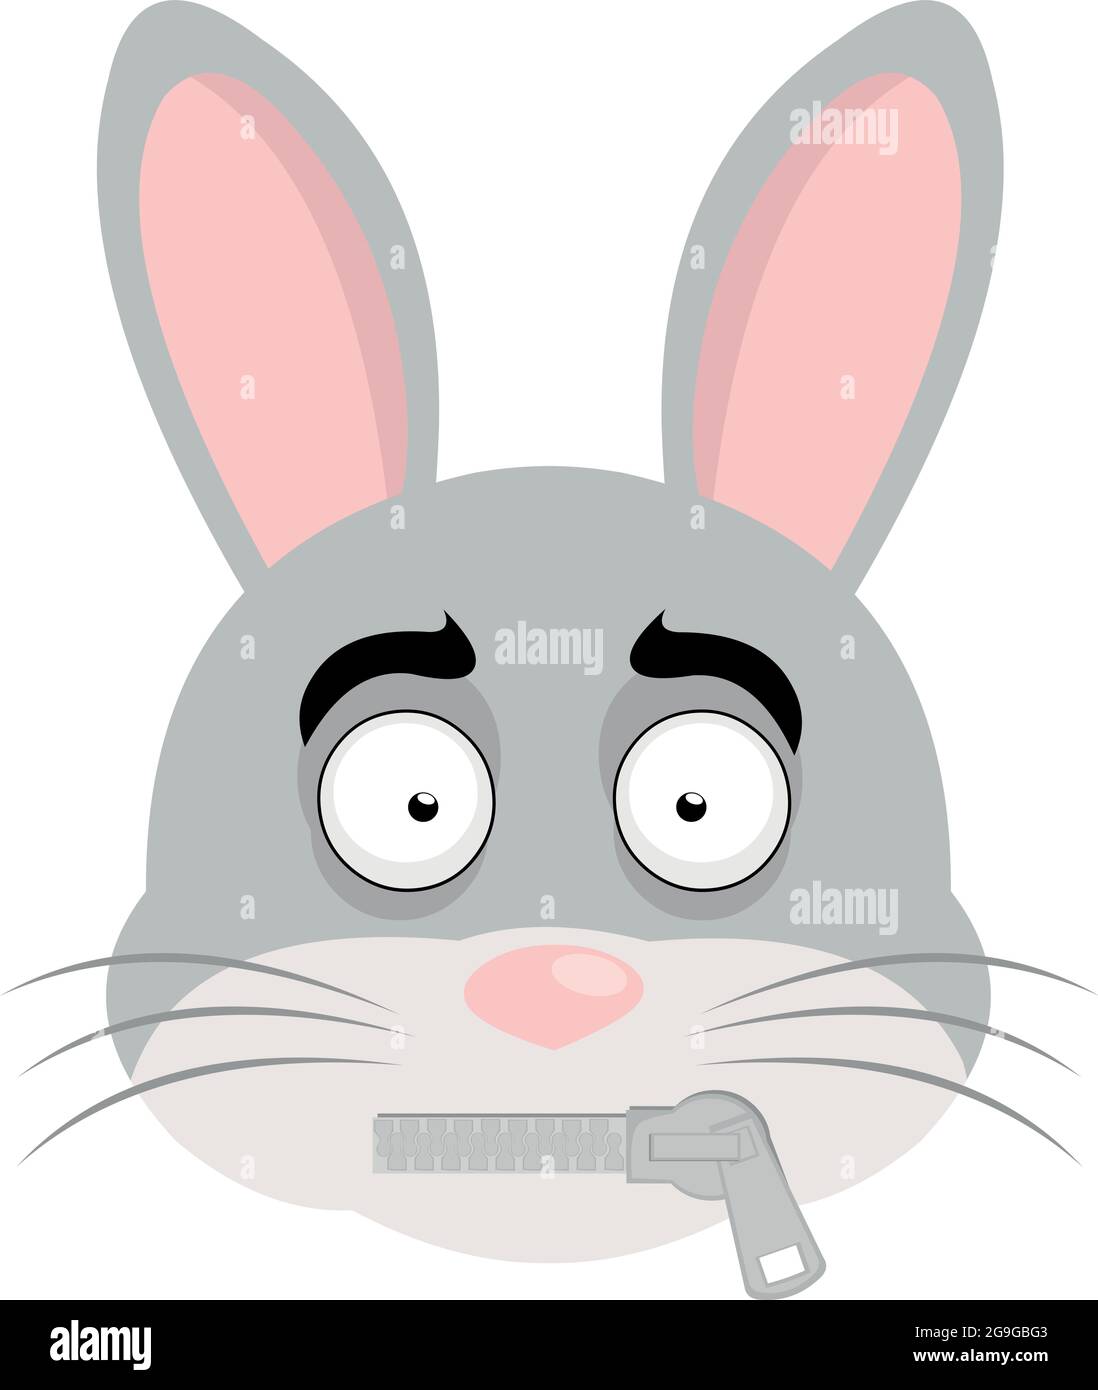 Vector illustration of cartoon rabbit face emoticon with a zipper in its mouth Stock Vector